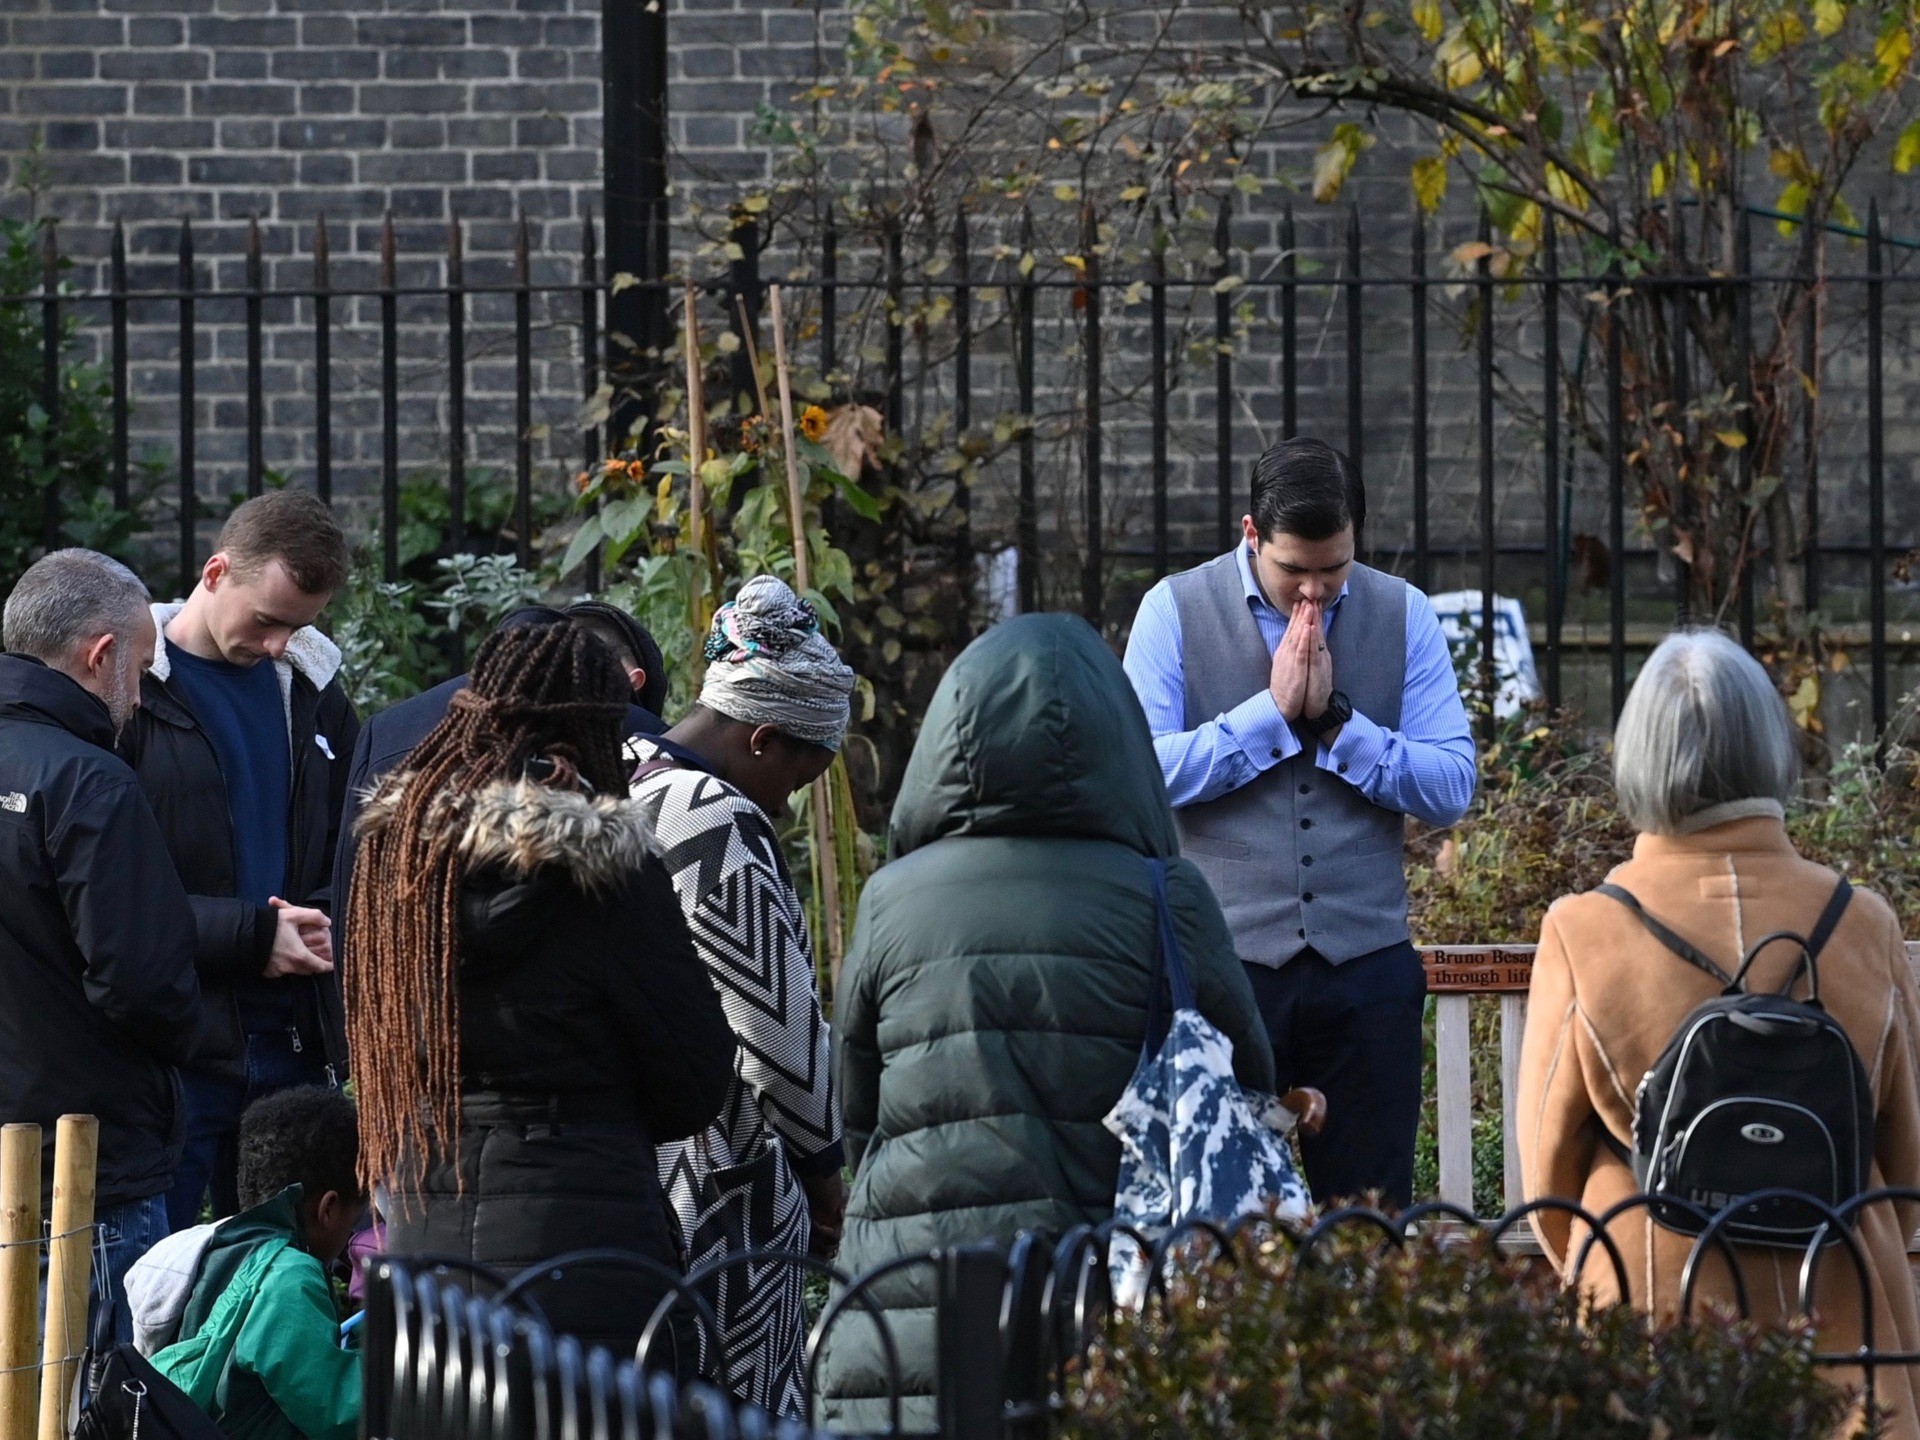 Pastor Regan King (C), of the Angel church in north London holds a service in near-by Myddelton Square Gardens on November 15, 2020, after coming to a agreement with the police to hold the service outside. - An evangelical church is defying lockdown restrictions to combat the spread of the novel coronavirus covid-19, by holding a public service on Sunday. (Photo by JUSTIN TALLIS / AFP) (Photo by JUSTIN TALLIS/AFP via Getty Images)